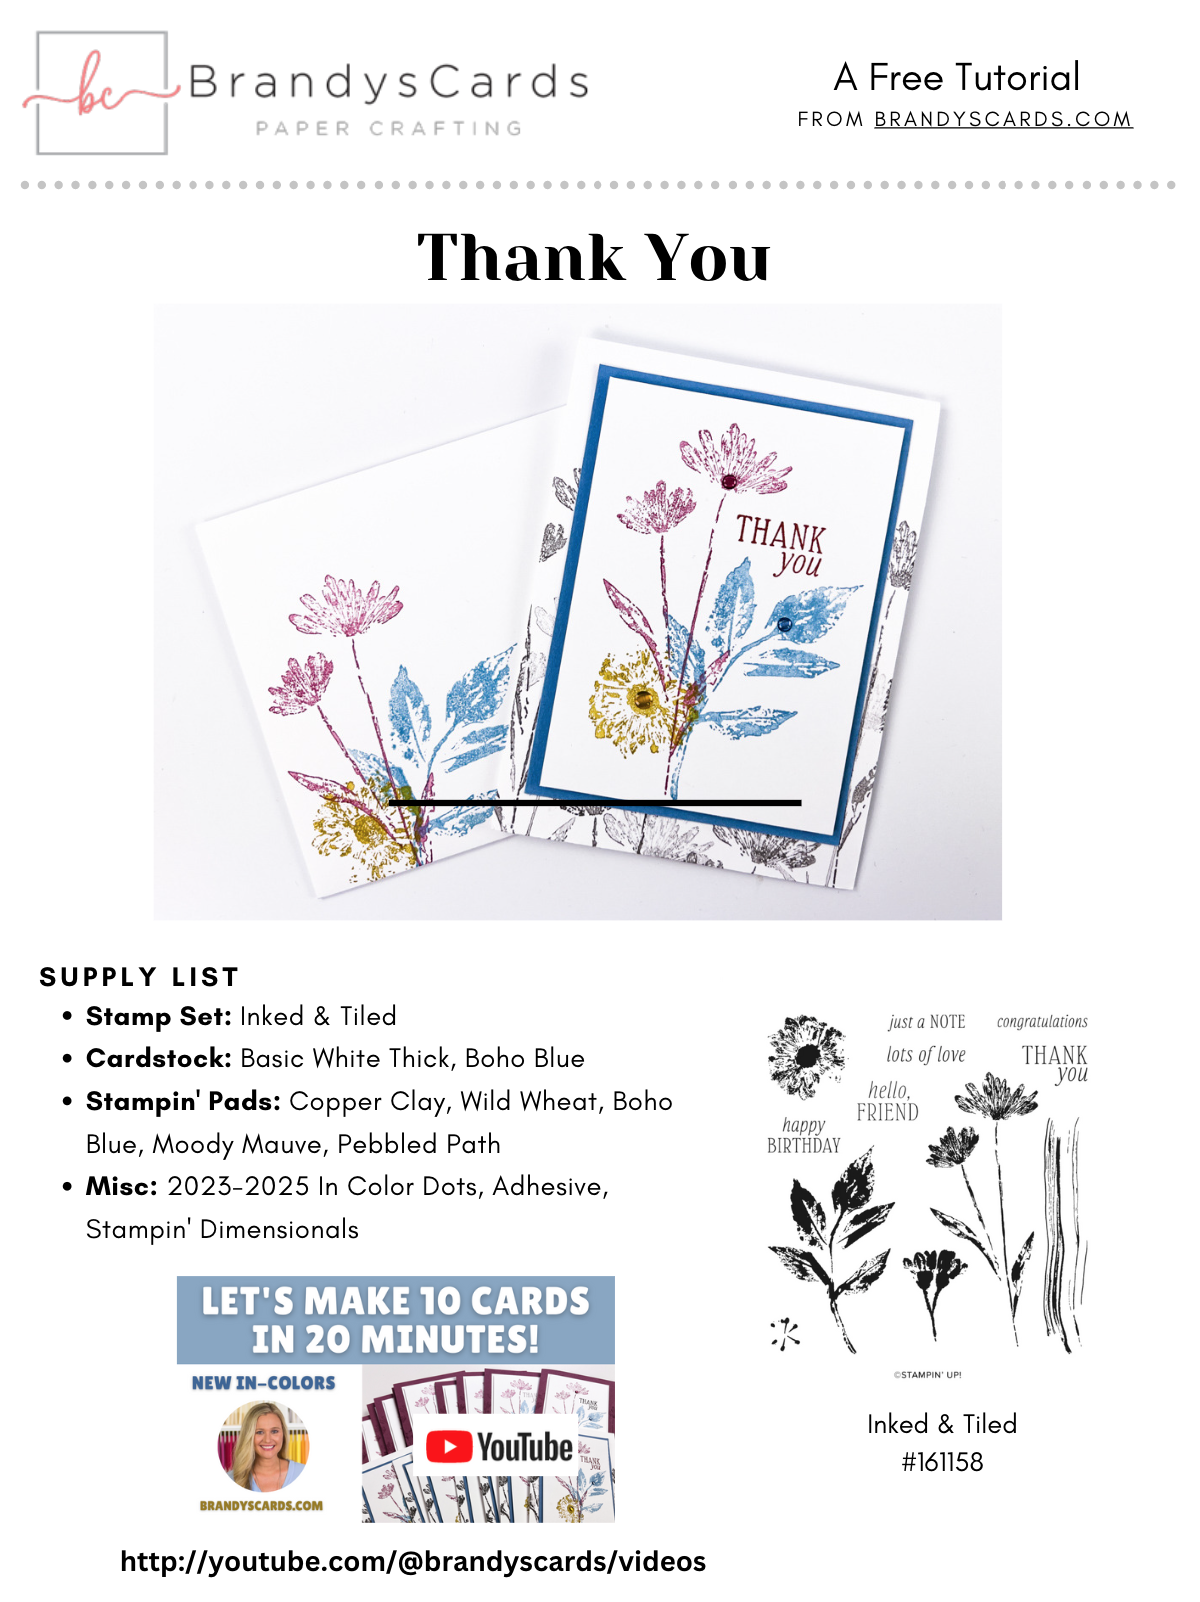 Free-thank-you-card-tutorial-easy-card-making-ideas-by-Brandy-Cox